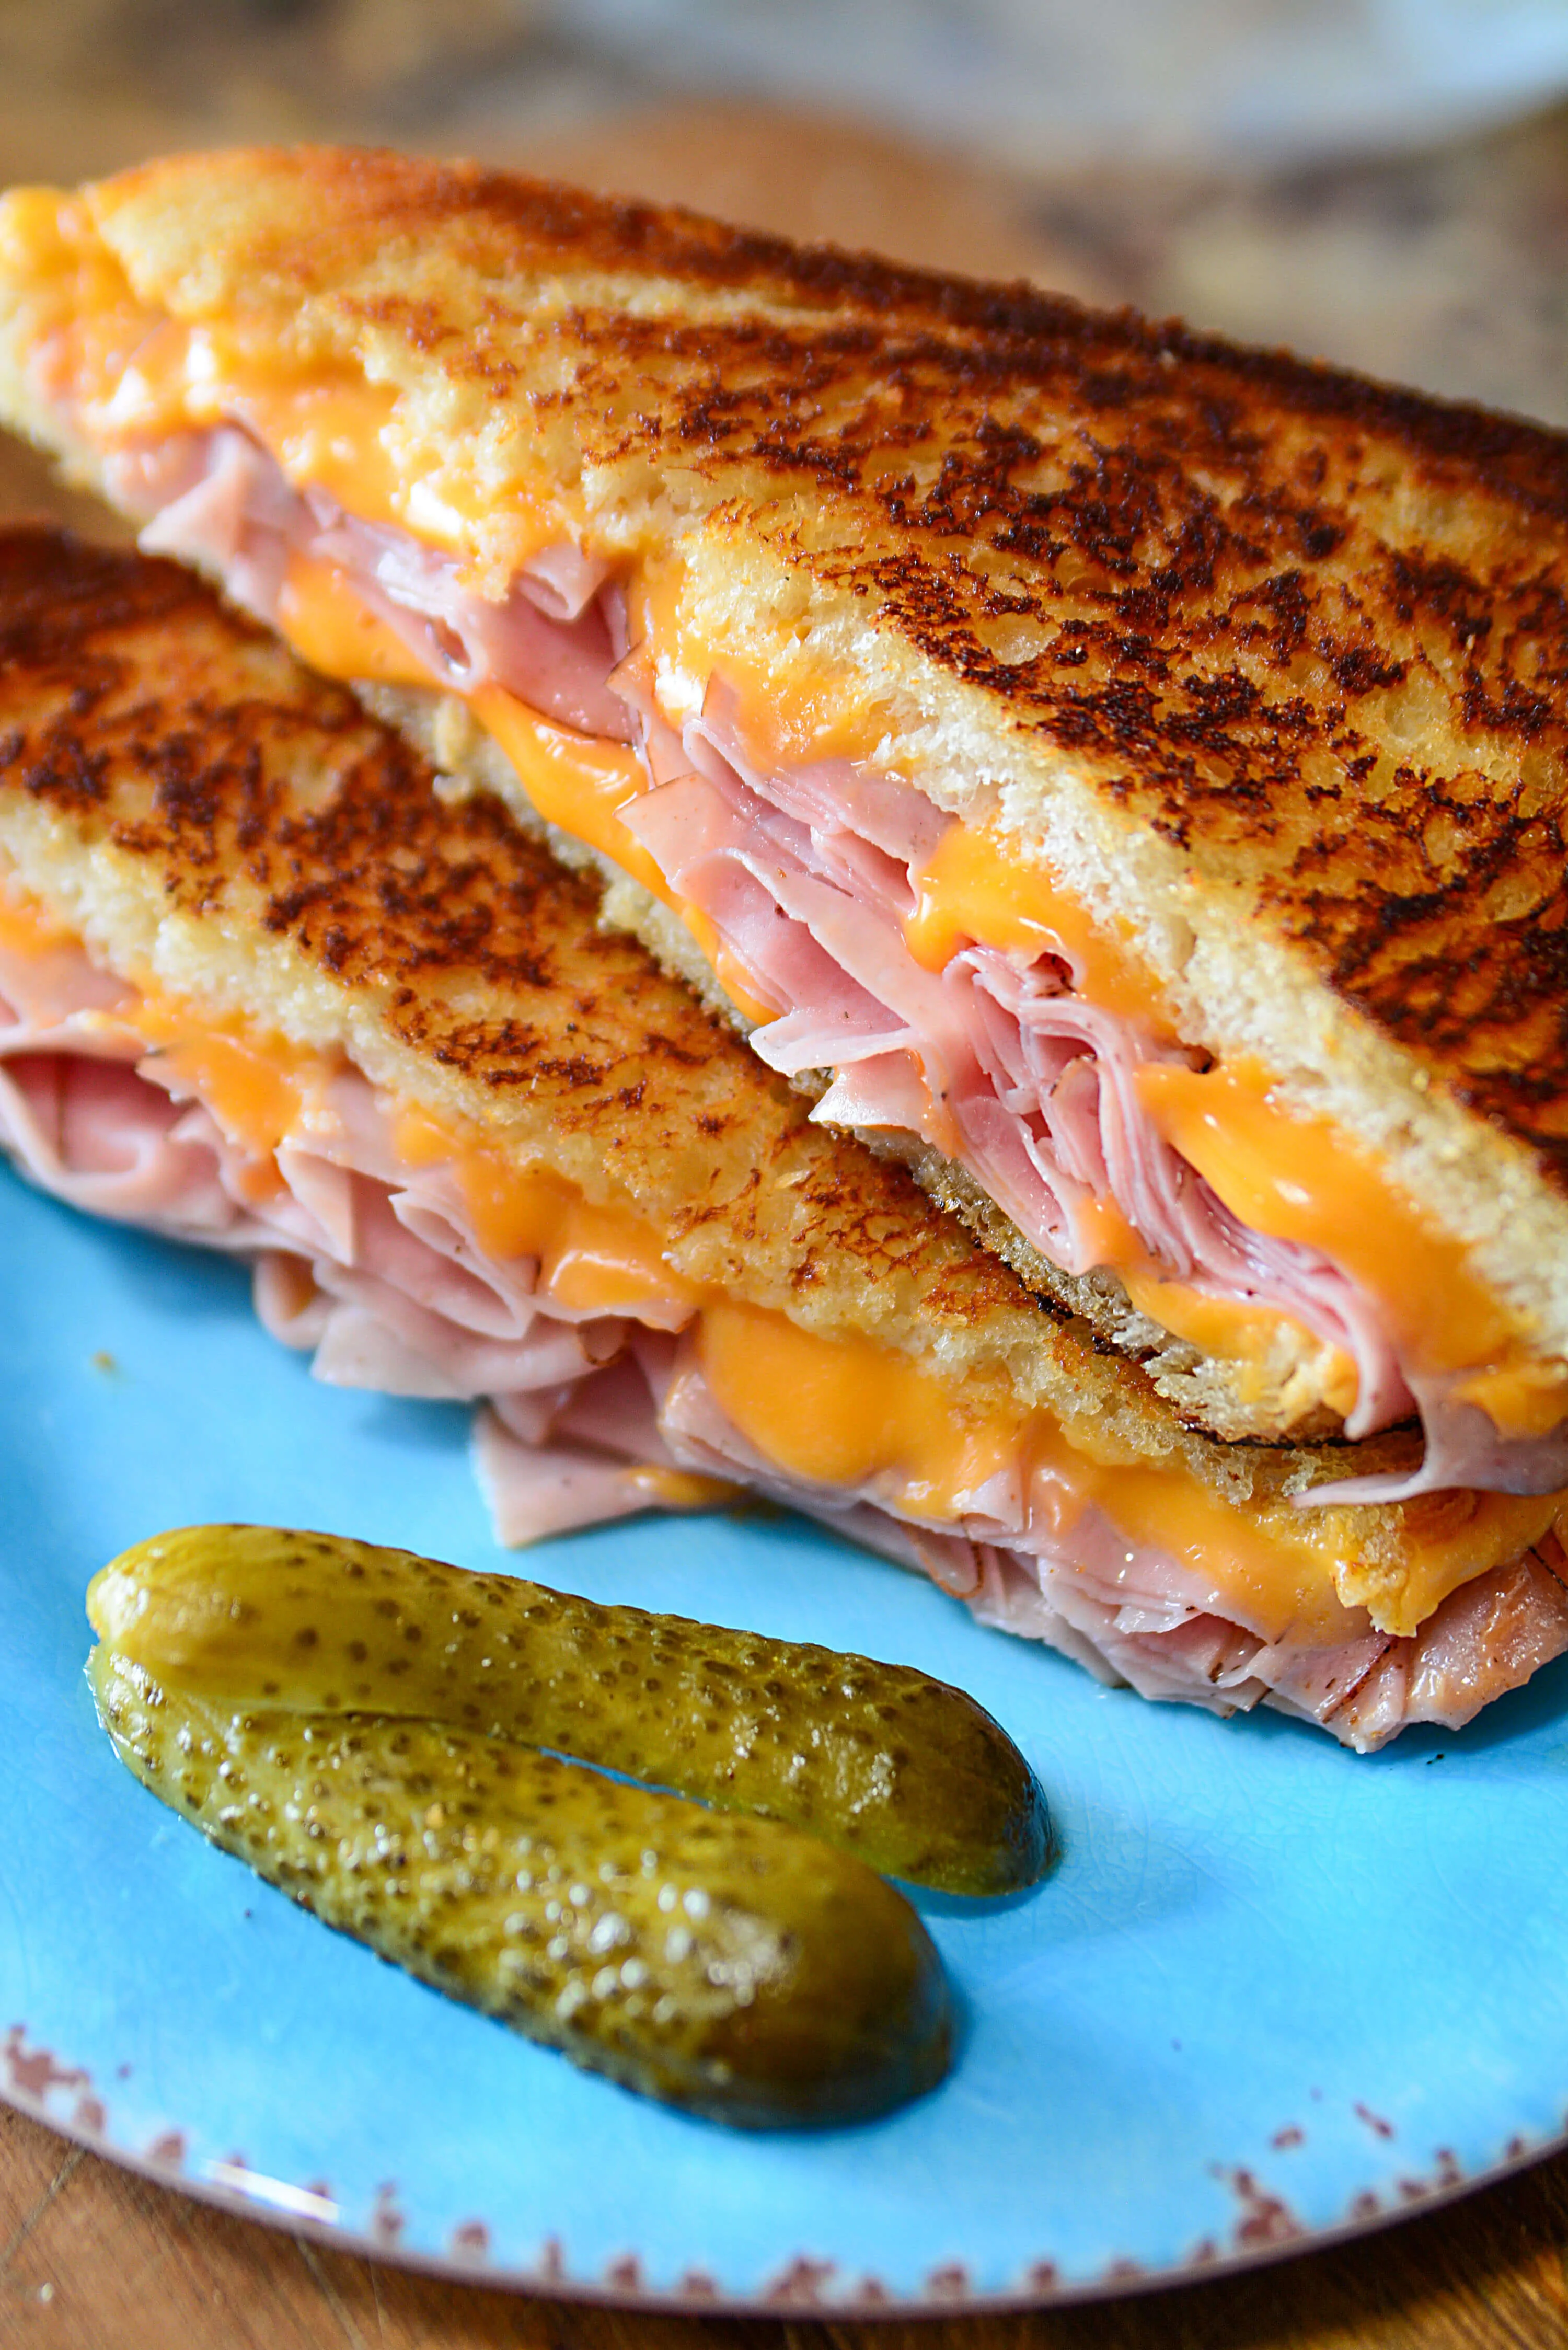 Make your ham and cheese sandwich as simple or as advanced as your heart desires! Here's a great recipe and some great tips!